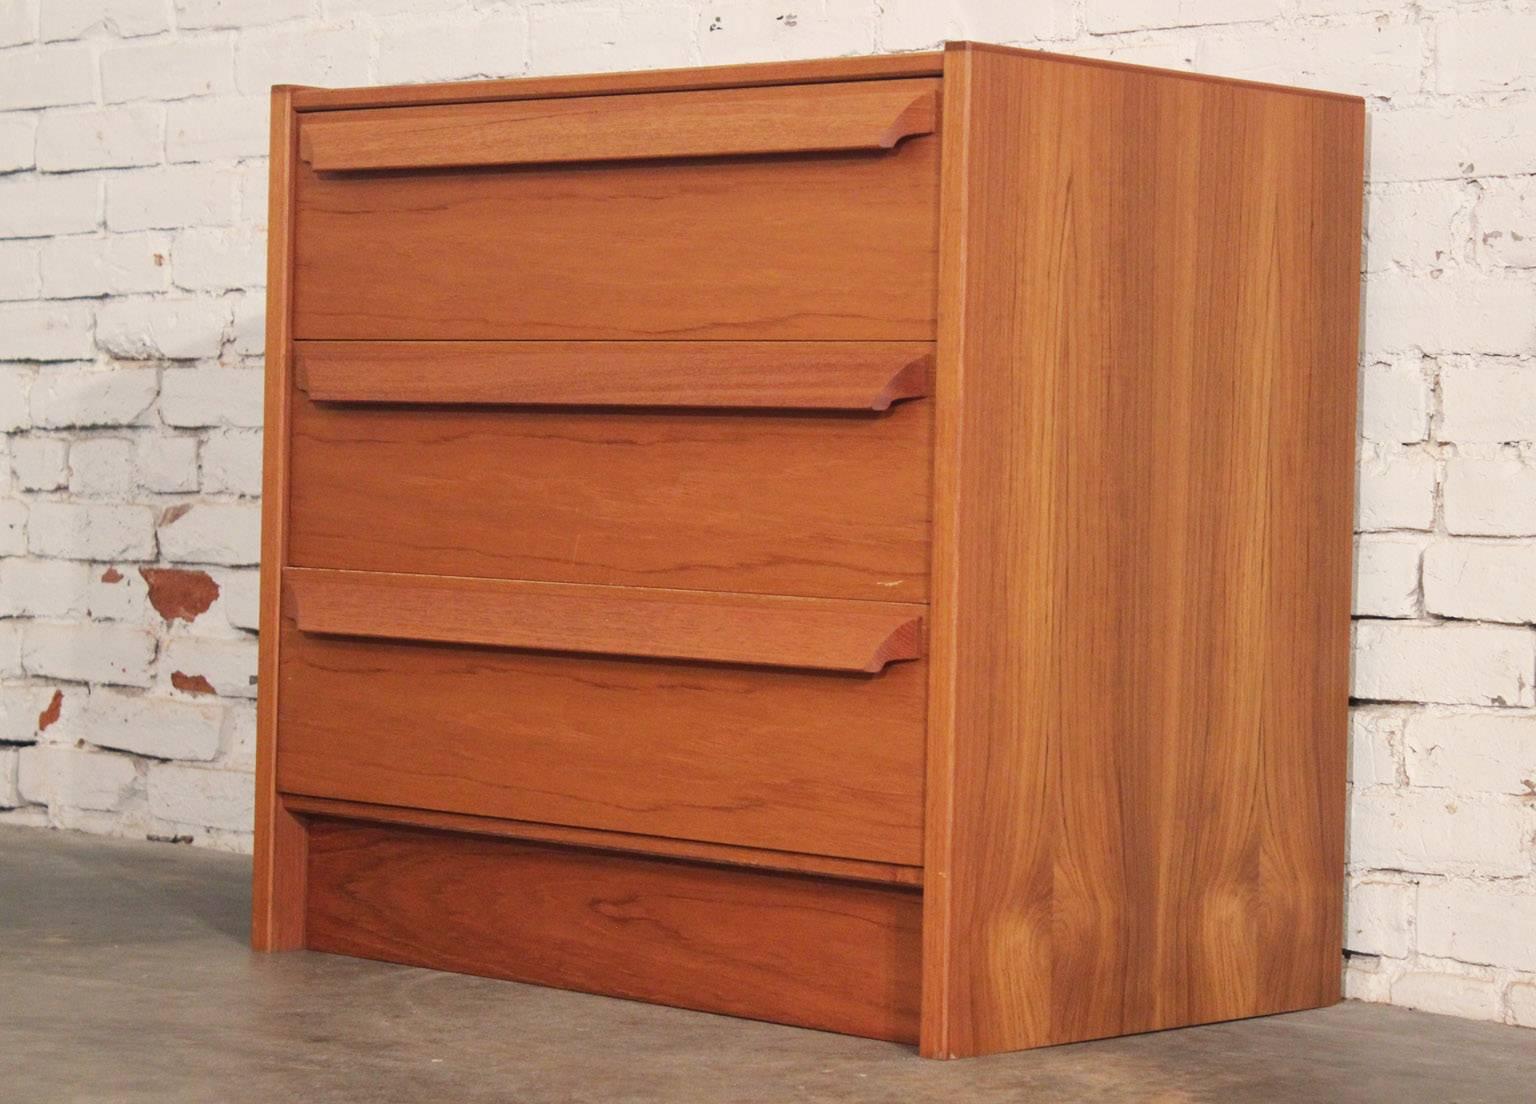 Beautiful and useful are just two of the words to describe this great Danish Mid-Century Modern small chest of drawers with its matching mirror. This circa 1980s Scandinavian Modern piece is in wonderful vintage condition.

This three-drawer chest